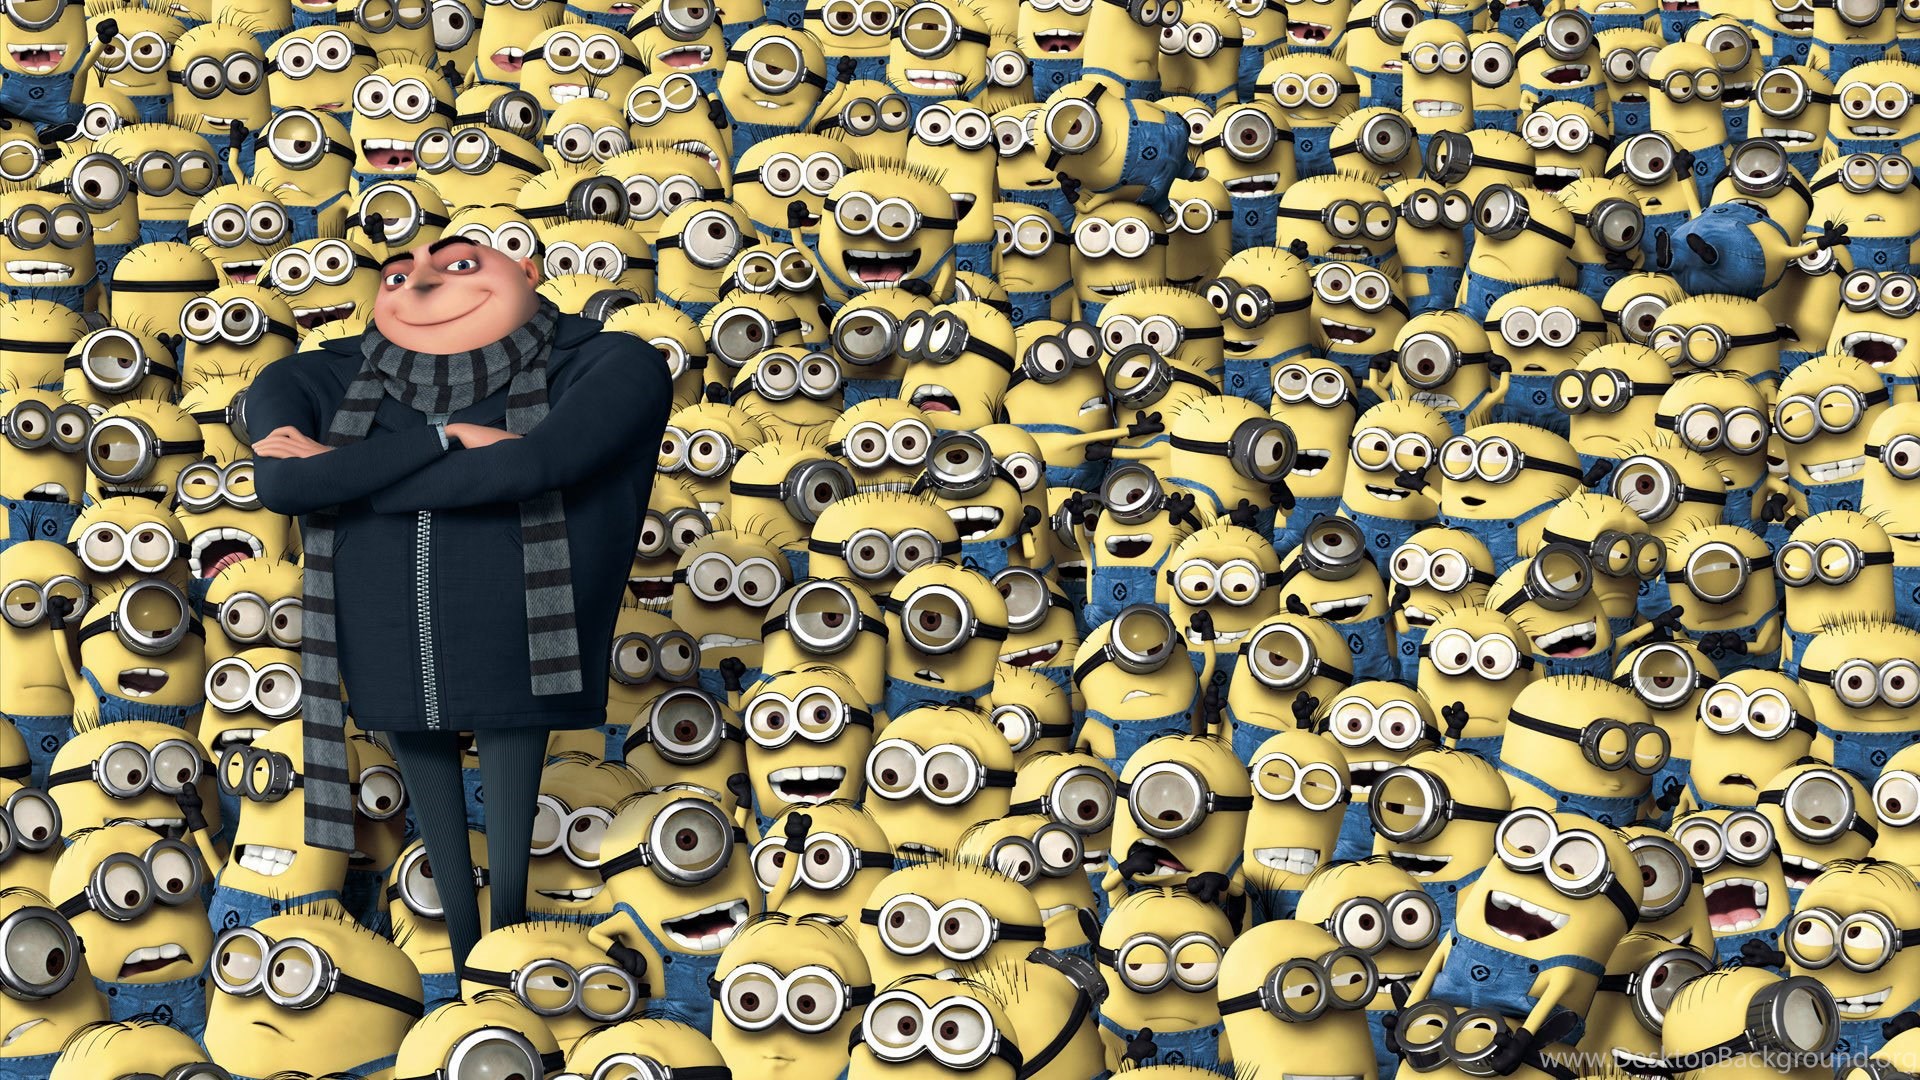 New Minions 2 Movie Wallpapers